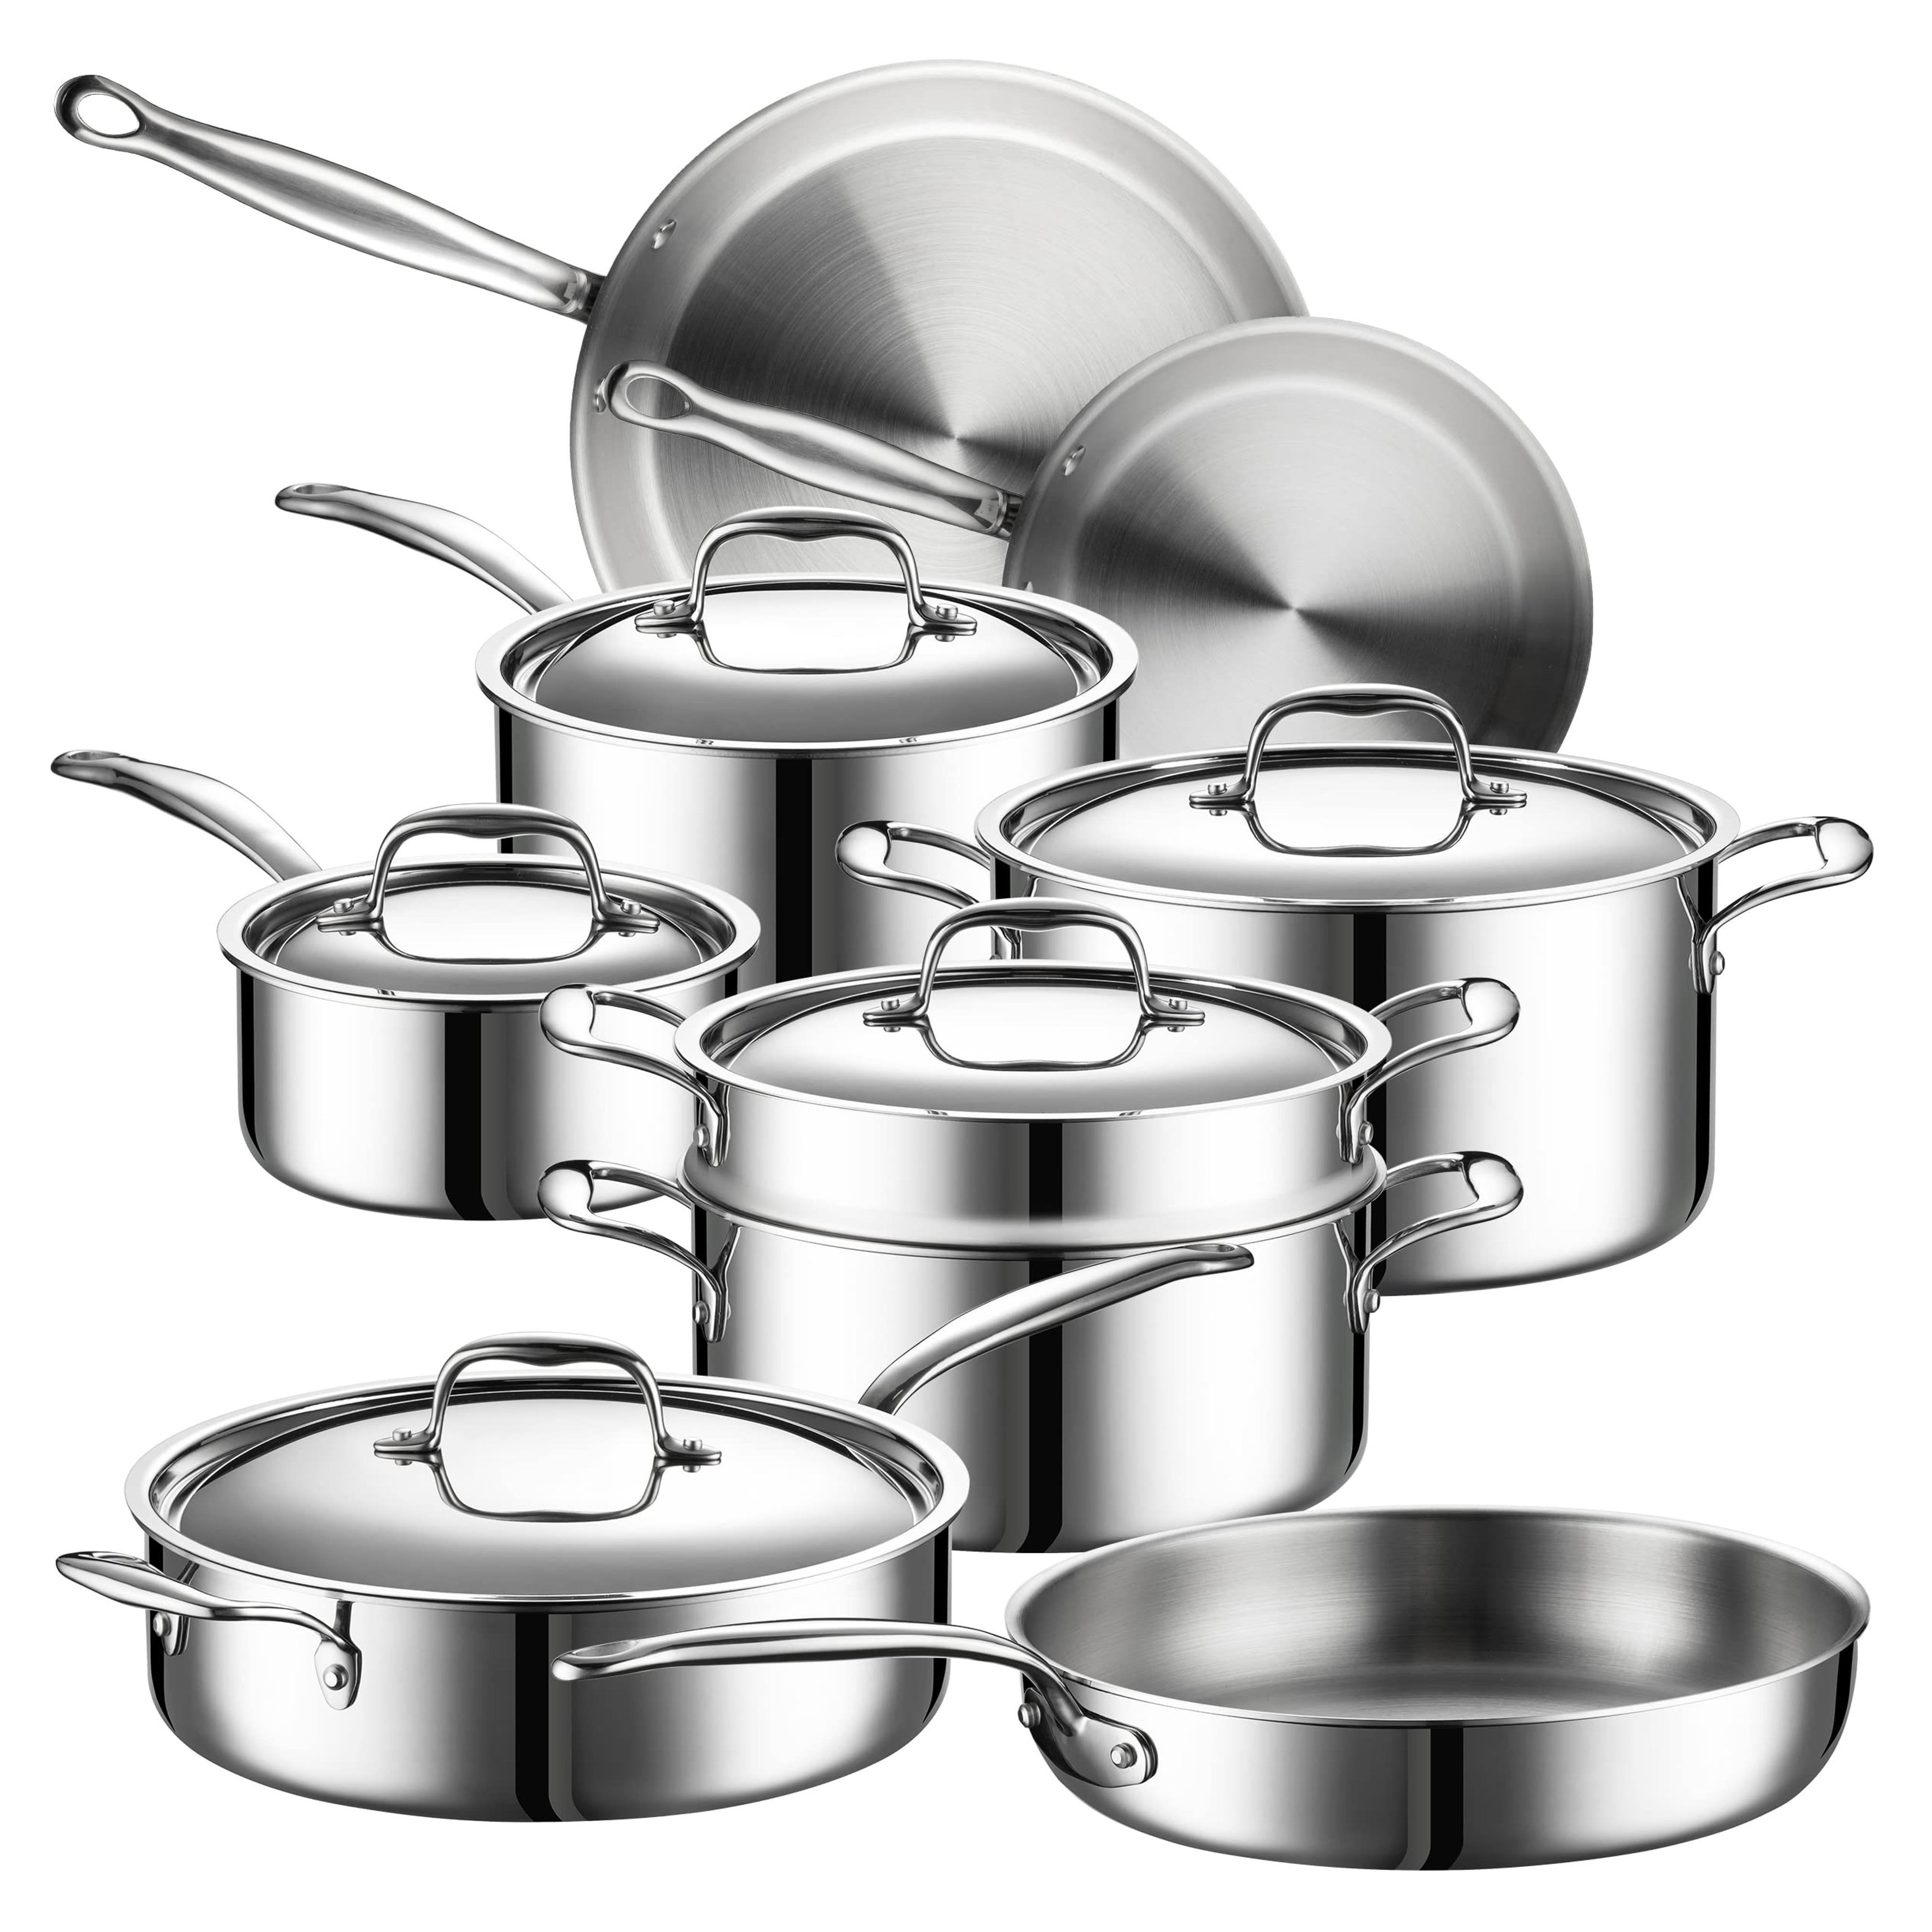 Legend 5 Ply Stainless Steel Cookware Set | 14 Piece Best Heavy Pots and Pans Set | Professional Quality Clad Pan & Pot Cook Sets, All Kitchen Surface Induction & Oven Safe | PFOA, PTFE & PFOS Free